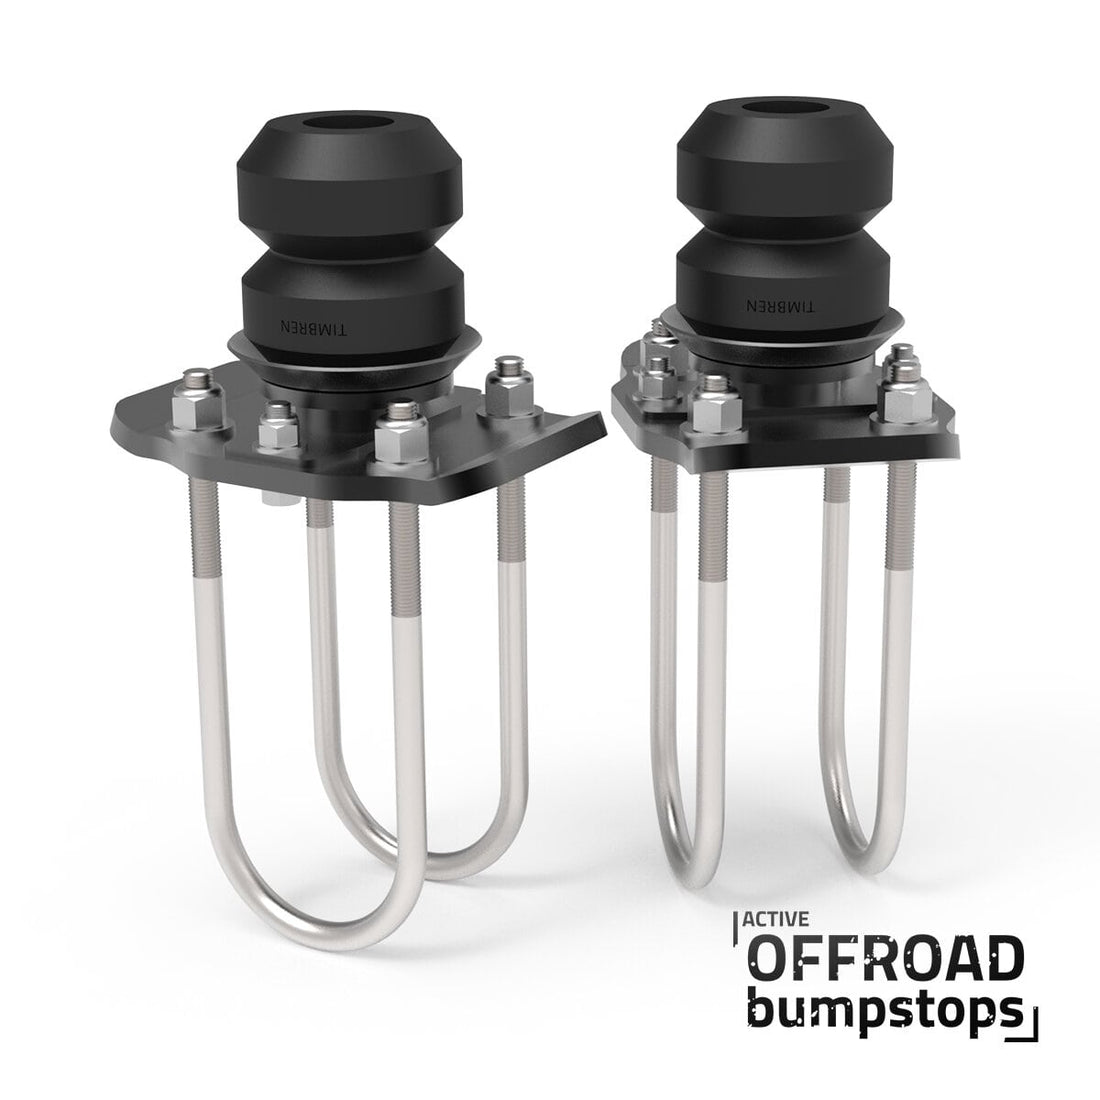 Active Off-Road Bumpstops w/ U-Bolt Flip Kit for 2015-Present Chevy Colorado and GMC Canyon - Rear Kit - SKU #ABSGMFK